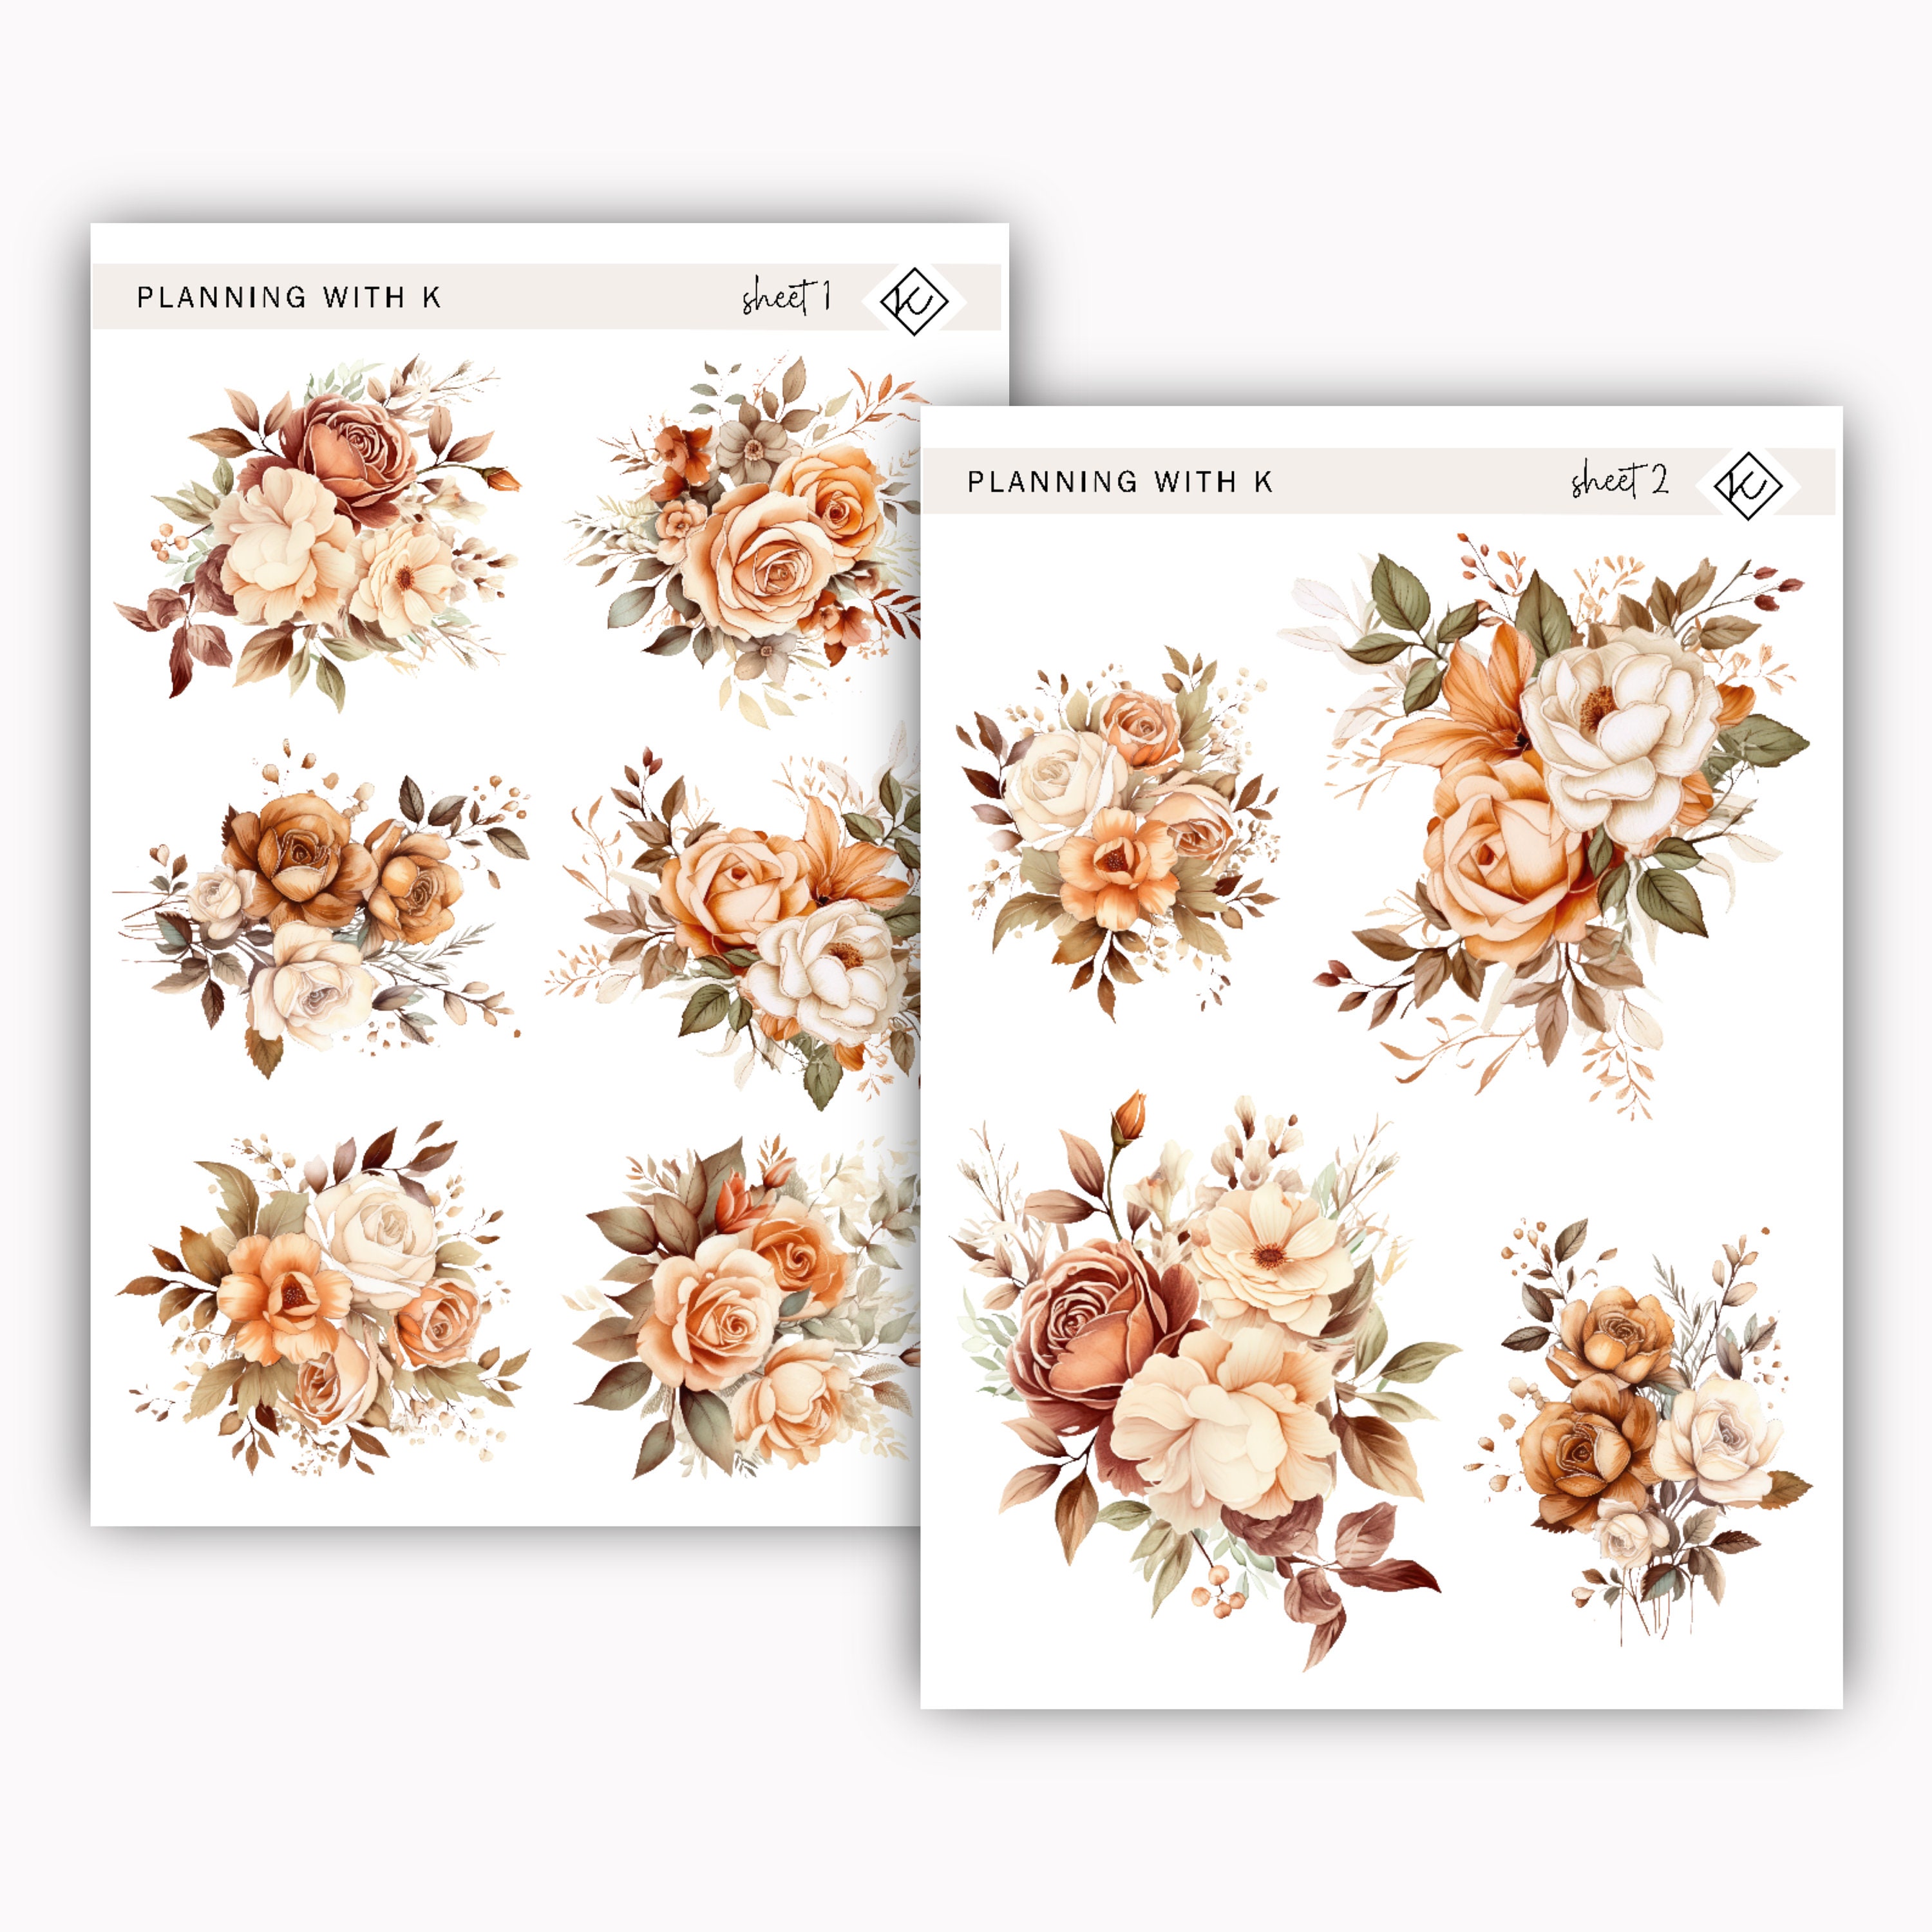 Transparent Monthly Planner Flower Stickers (12 Sheets) - Clear Floral Stickers for Calendar Planners